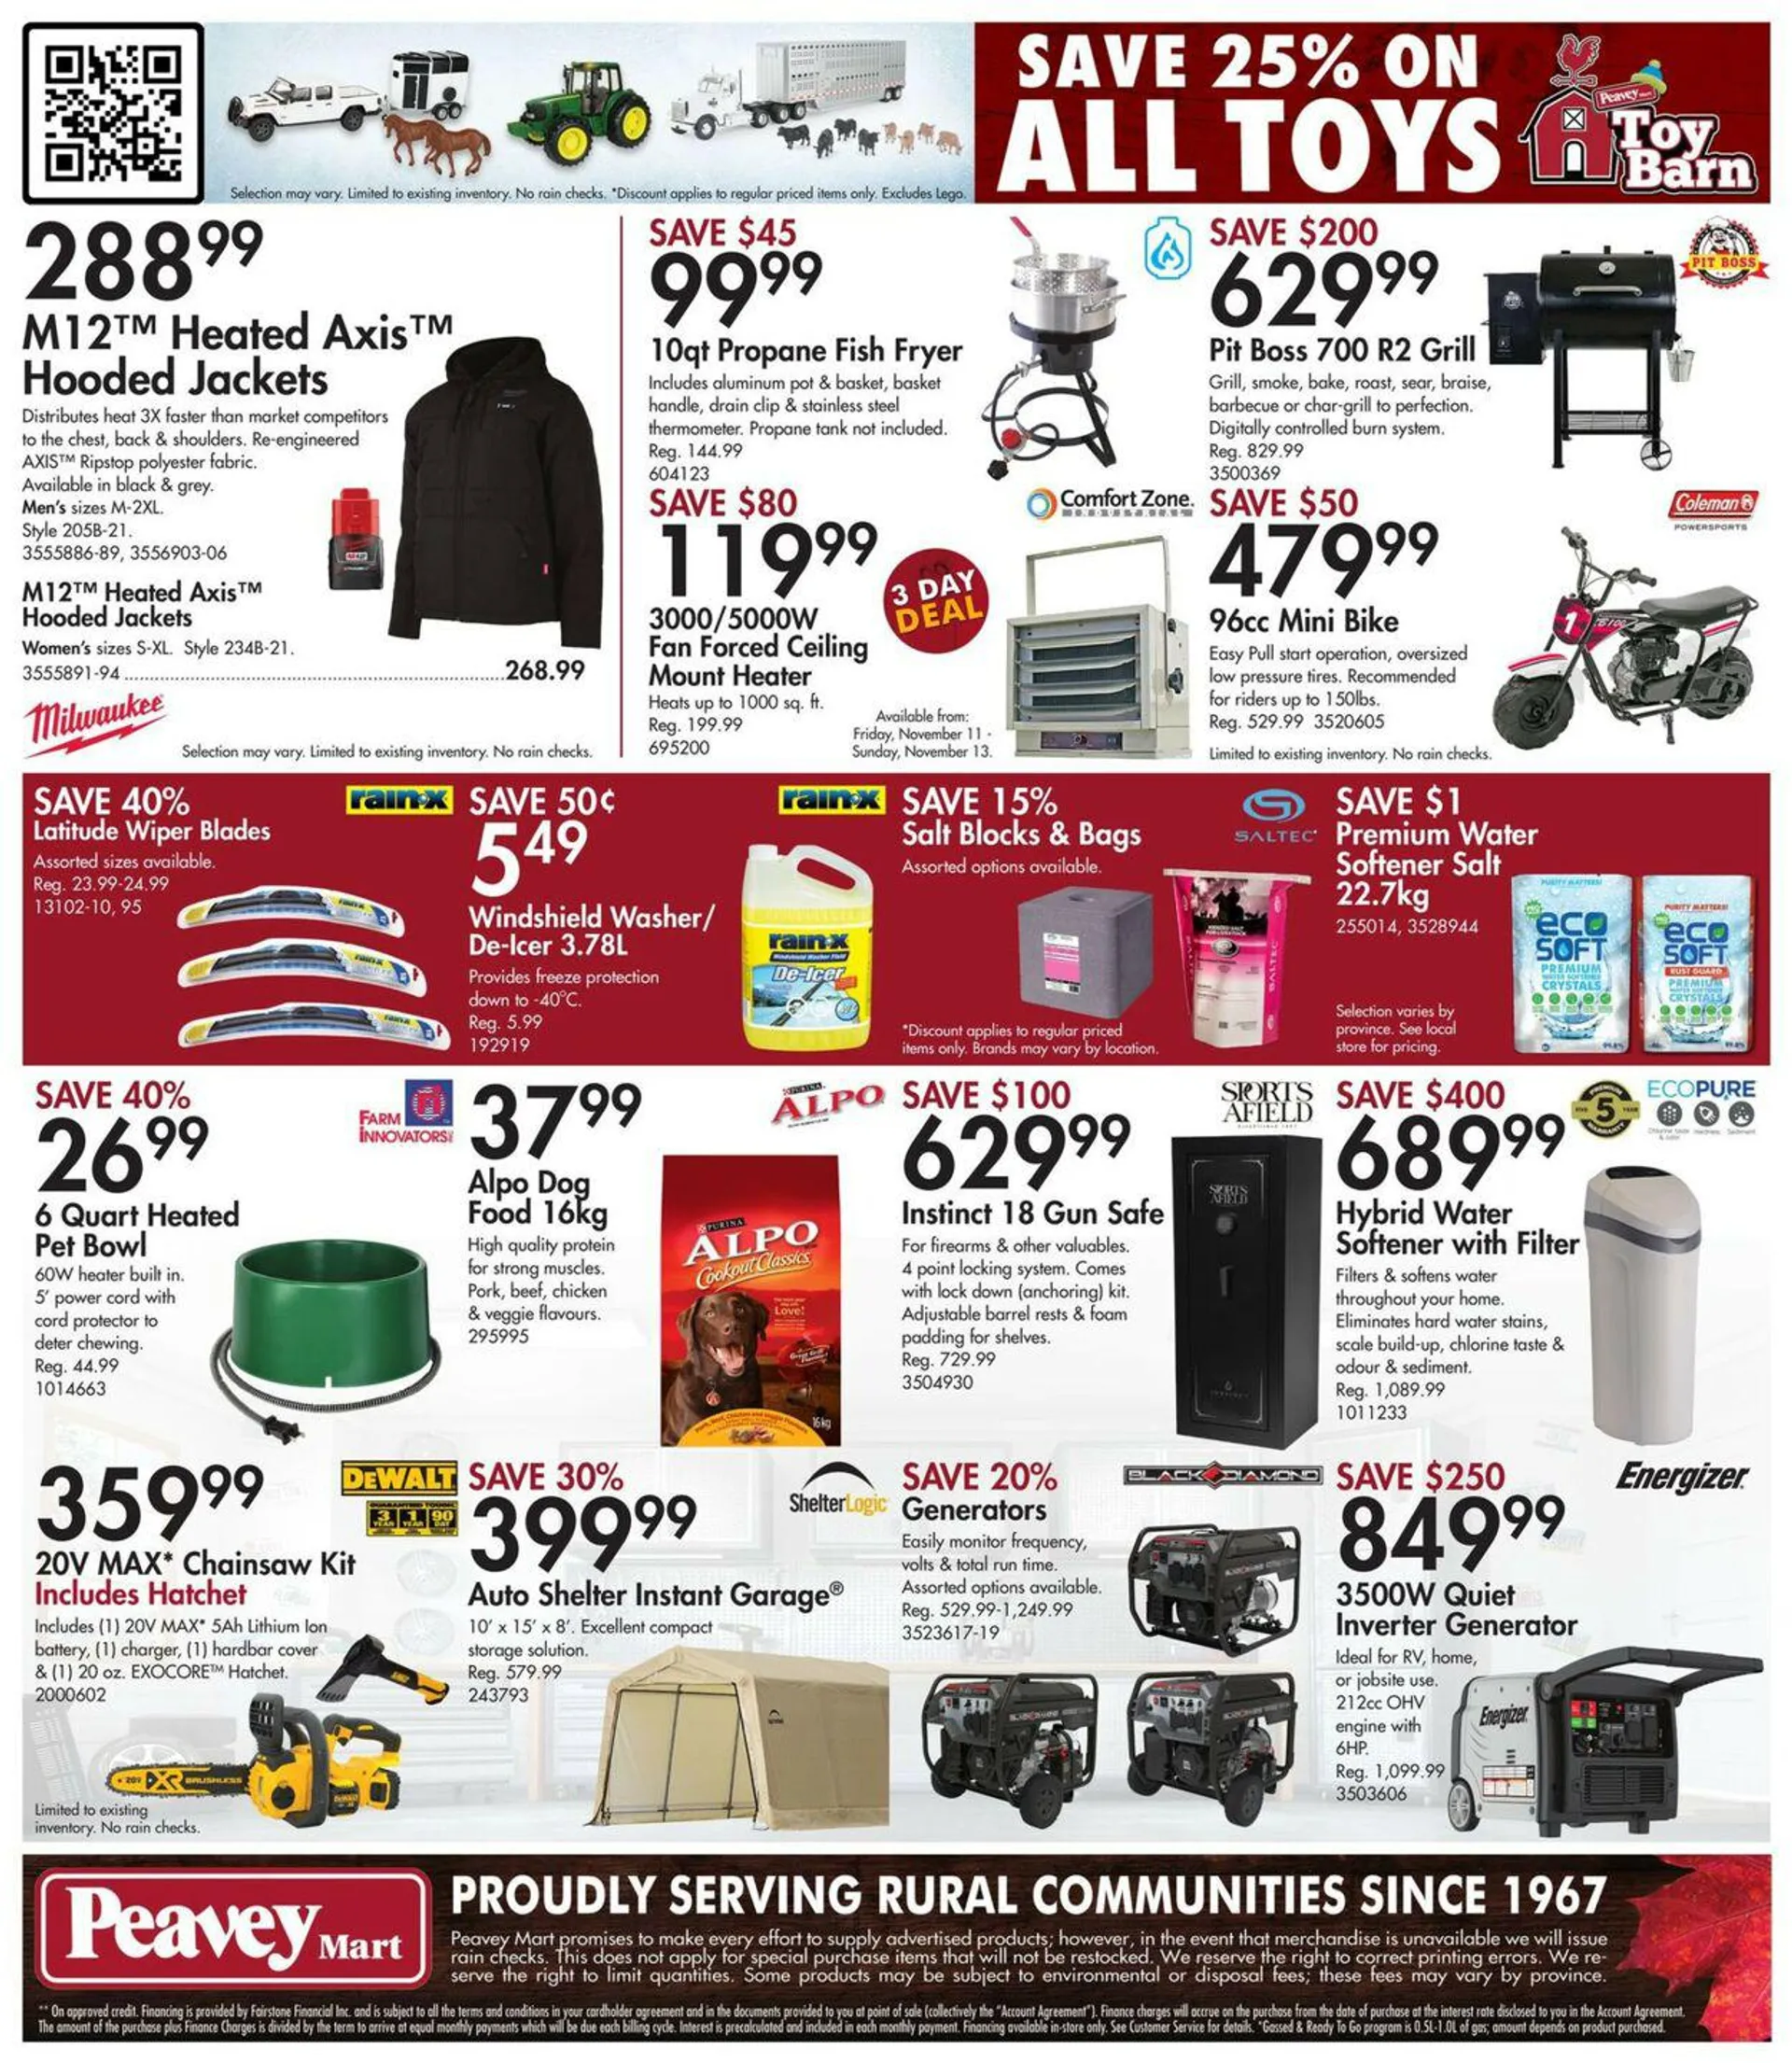 TSC Stores Current flyer - 13